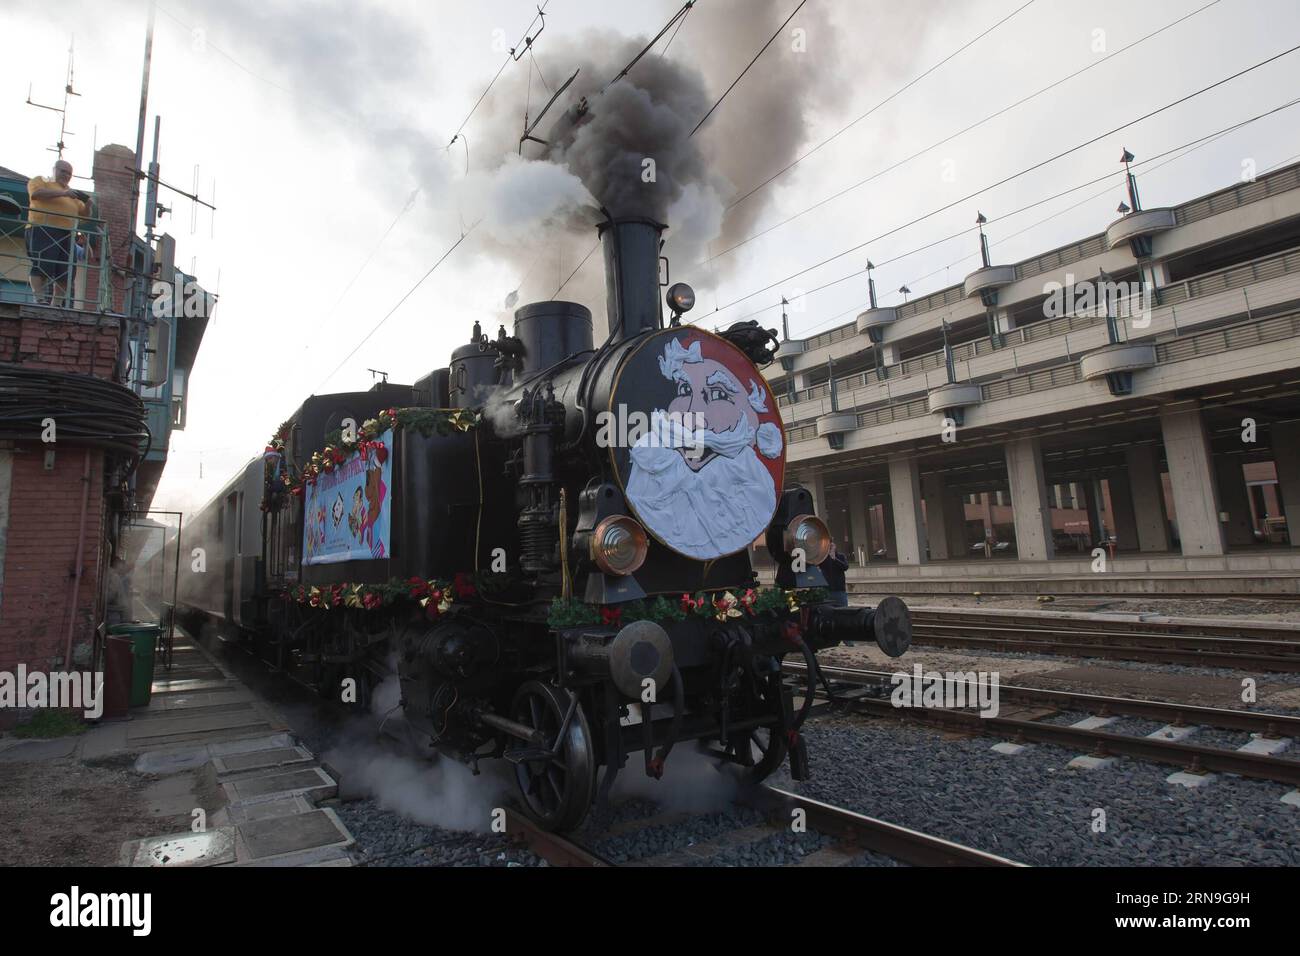 (151204) -- , Dec. 4, 2015 -- The Santa Express with a decorated steam engine departs from Western Railway Station in , Hungary, on Dec. 4, 2015. The Santa Express is a special train service, heading for Hungarian Railway History Park, a railway museum located in , where children can attend a number of programs and meet Santa Claus. The Santa Express runs between Dec. 4 to 6. Attila Volgyi) HUNGARY--SANTA EXPRESS TRAIN Budapest PUBLICATIONxNOTxINxCHN   151204 DEC 4 2015 The Santa Shipping With a decorated Steam Engine Departs from Western Railway Station in Hungary ON DEC 4 2015 The Santa Ship Stock Photo